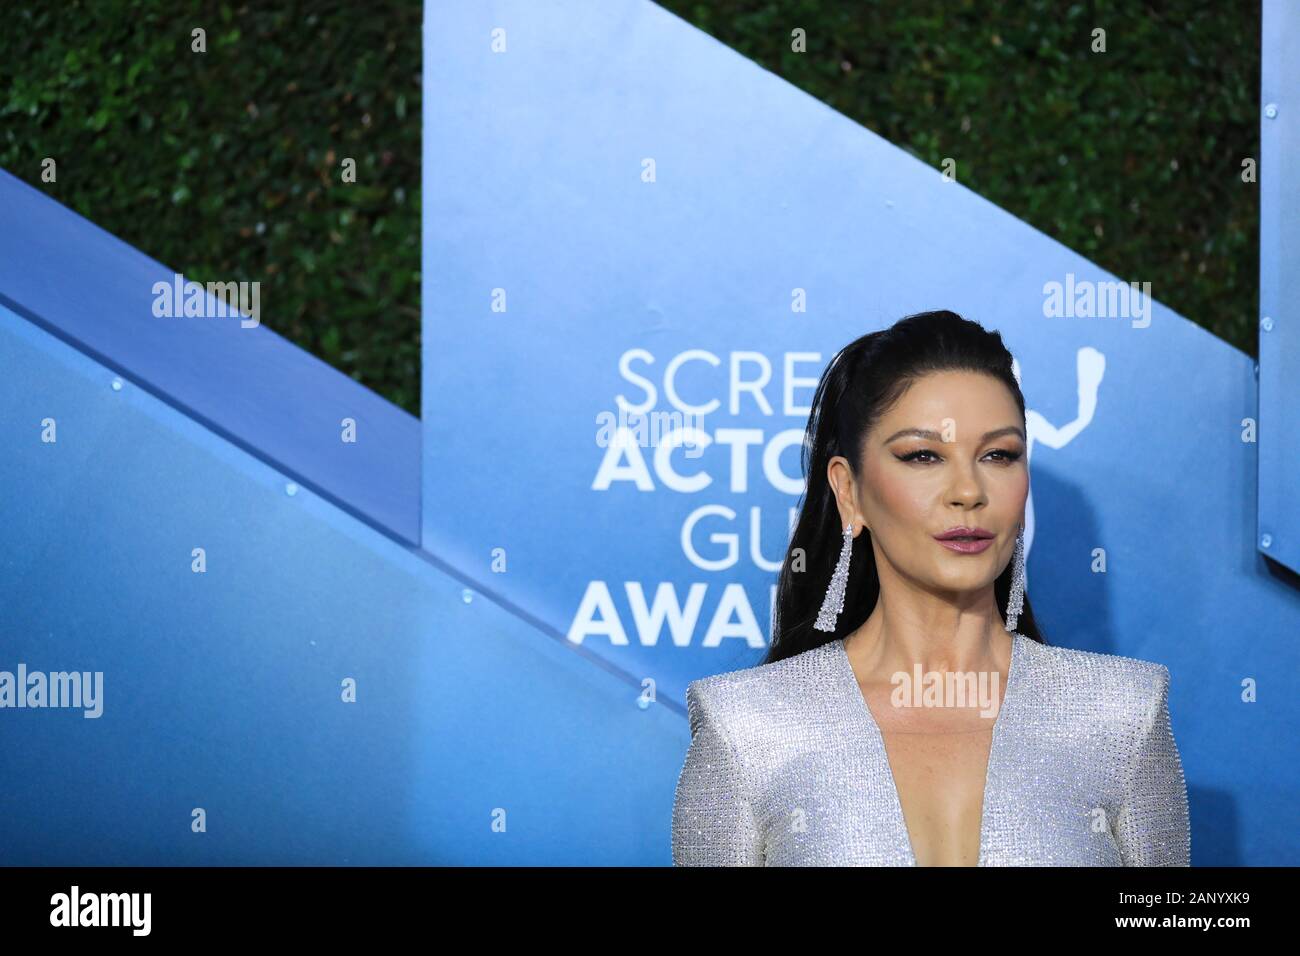 (200120) -- LOS ANGELES, Jan. 20, 2020 (Xinhua) -- Actress Catherine Zeta-Jones attends the 26th Annual Screen Actors Guild (SAG) Awards held at the Shrine Auditorium in Los Angeles, the United States, Jan. 19, 2020. (Xinhua/Li Ying) Stock Photo